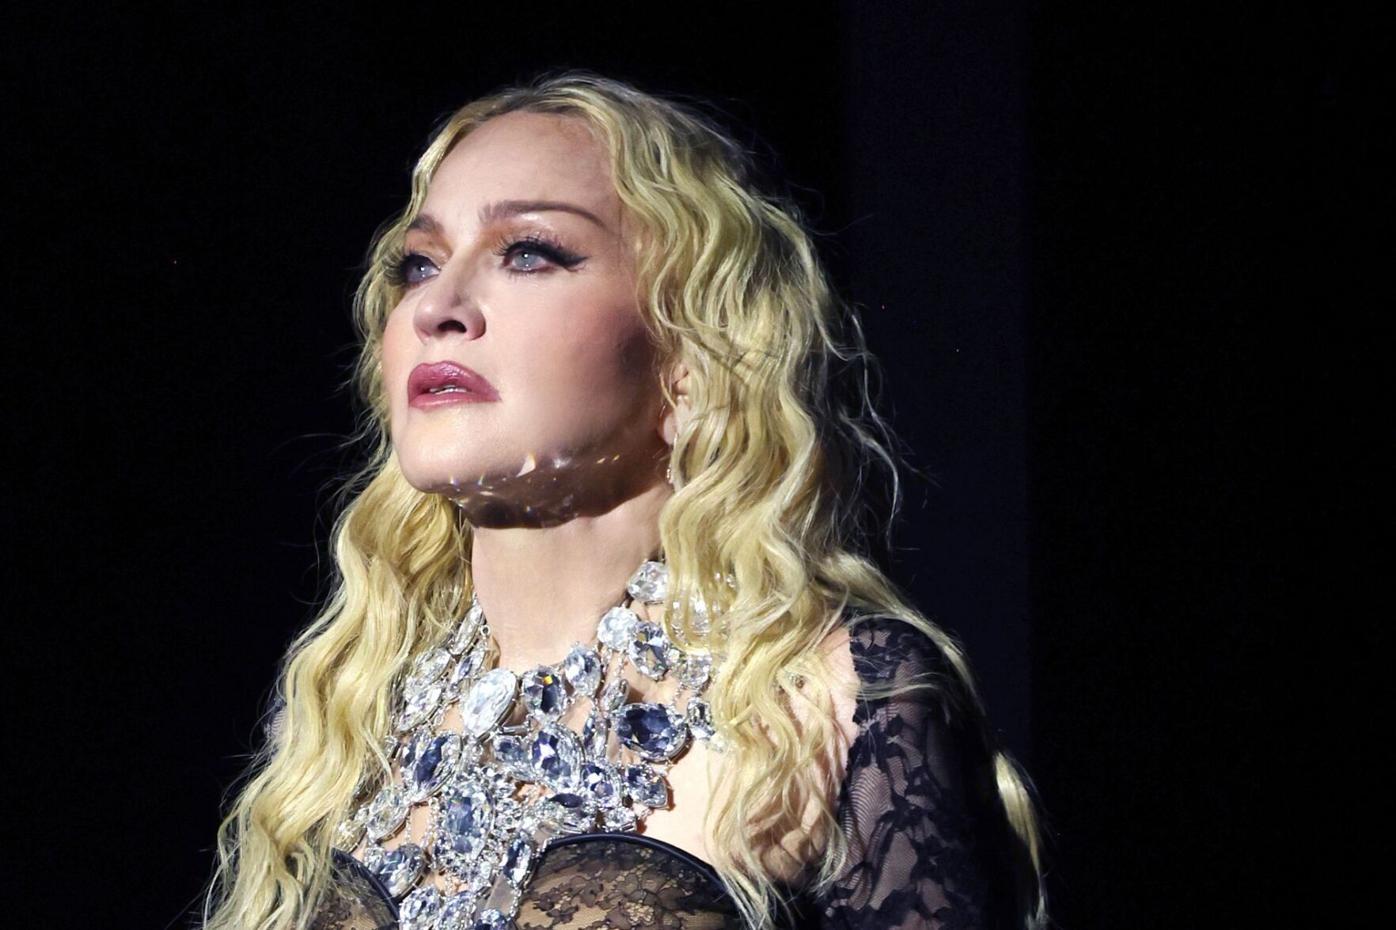 Madonna shares first word she said after coma, 'near-death experience